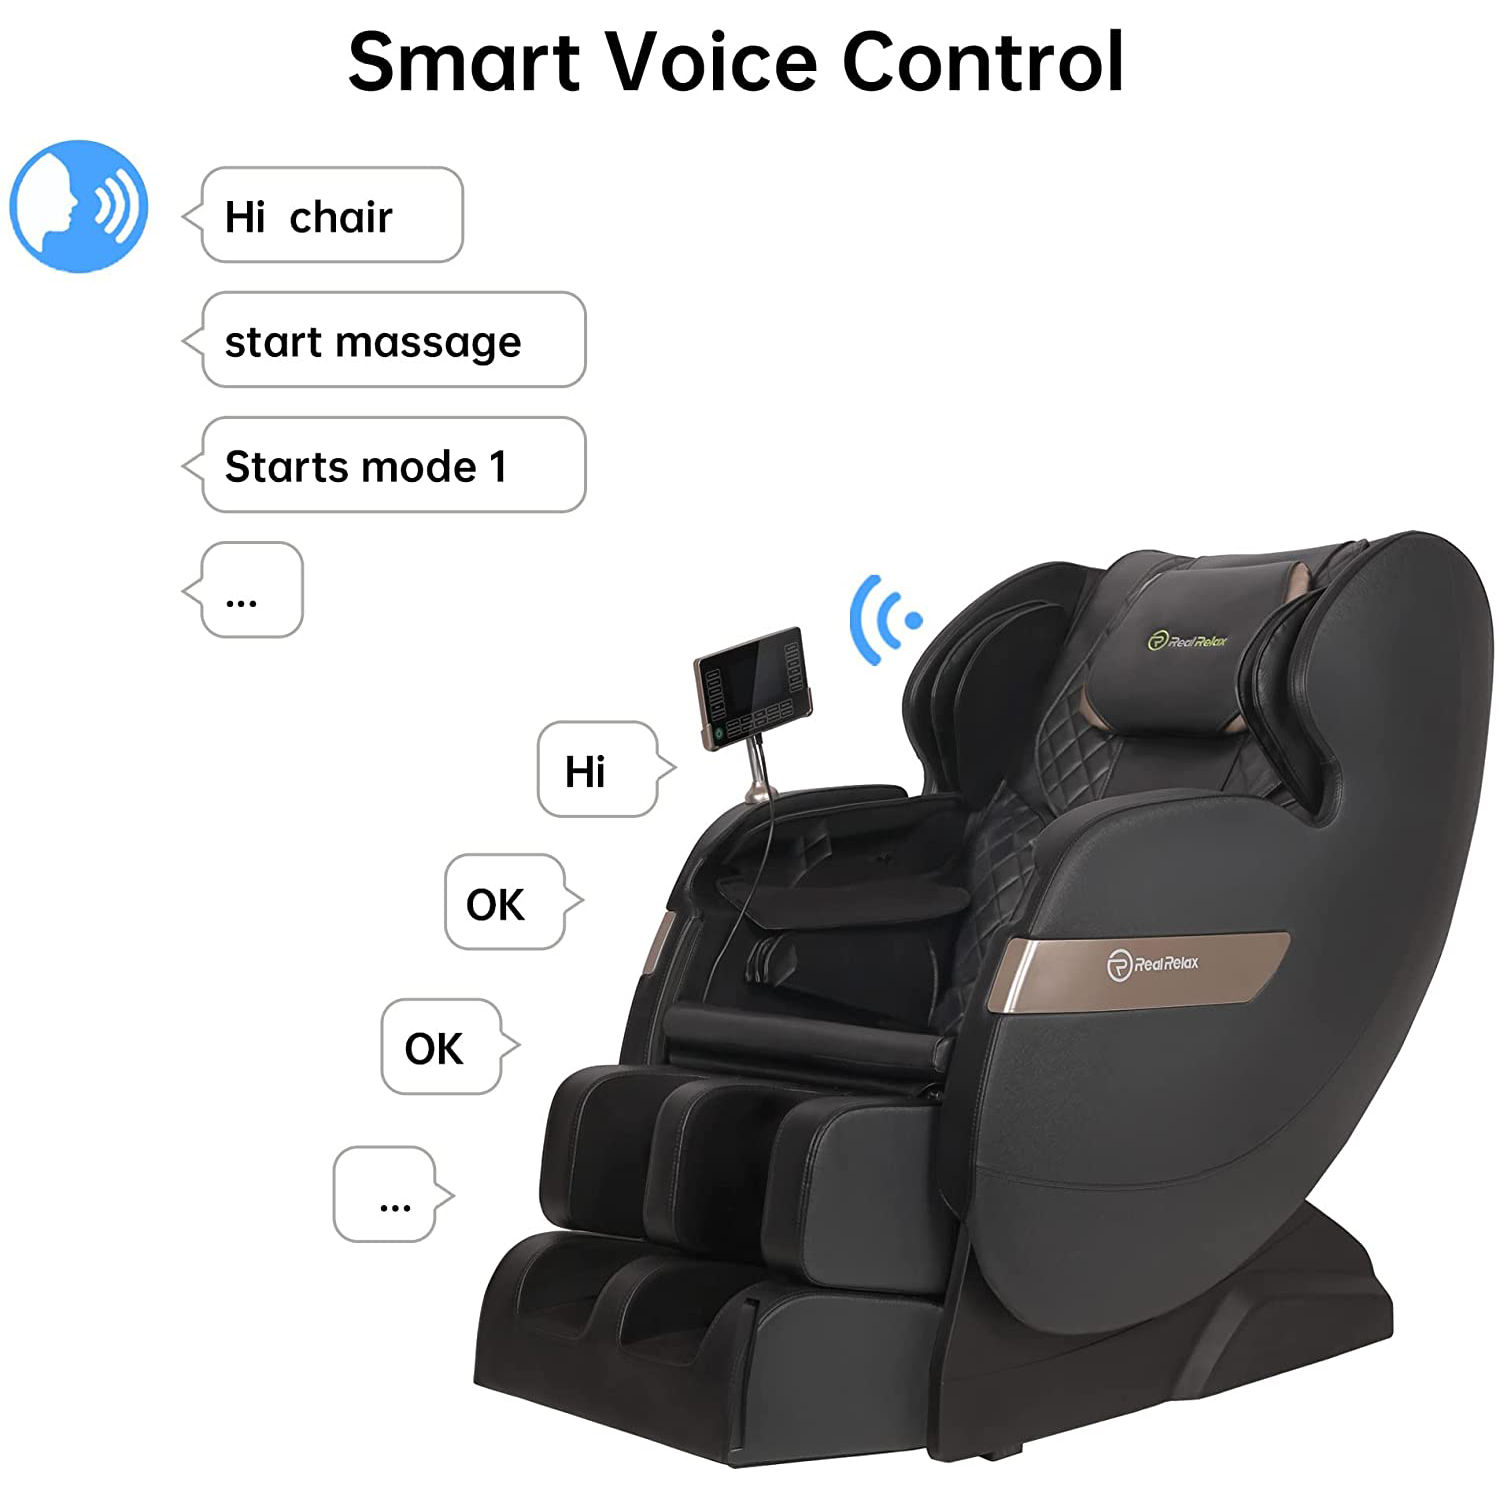 Real Relax S Track Massage Chair, Full Body Zero Gravity Shiatsu Recliner with Smart Voice Controller, Black - image 4 of 11